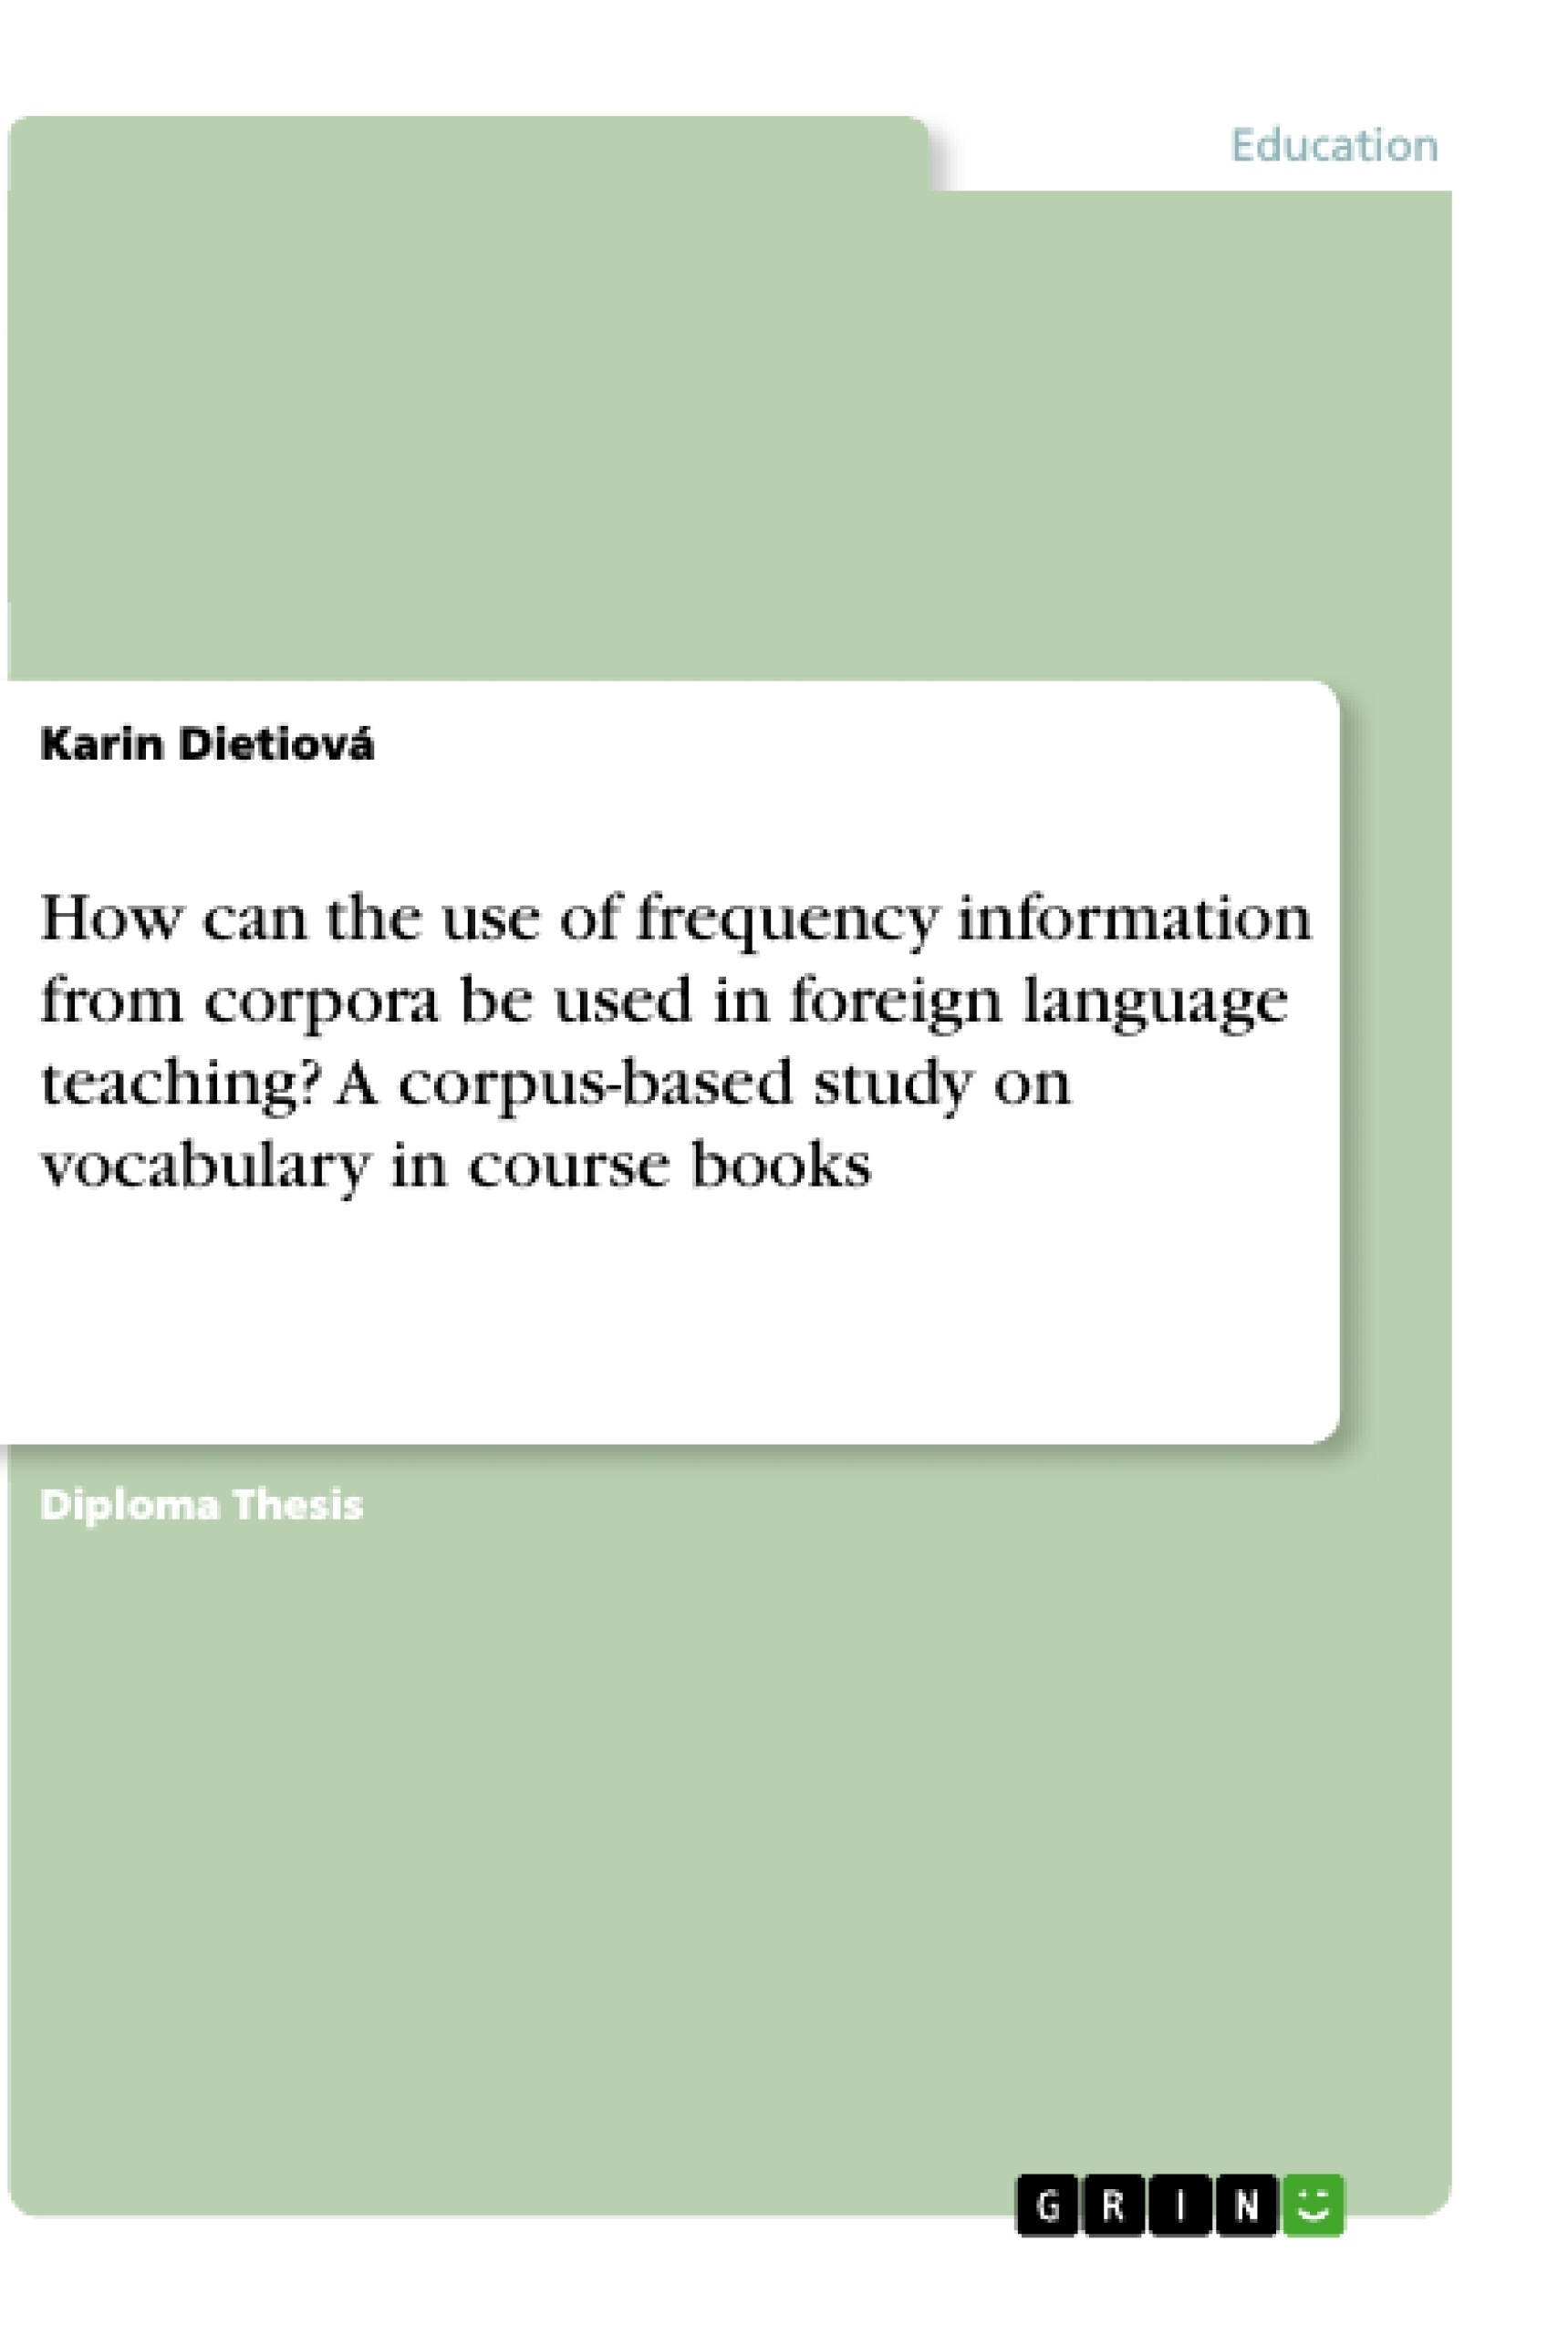 Title: How can the use of frequency information from corpora be used in foreign language teaching? A corpus-based study on vocabulary in course books